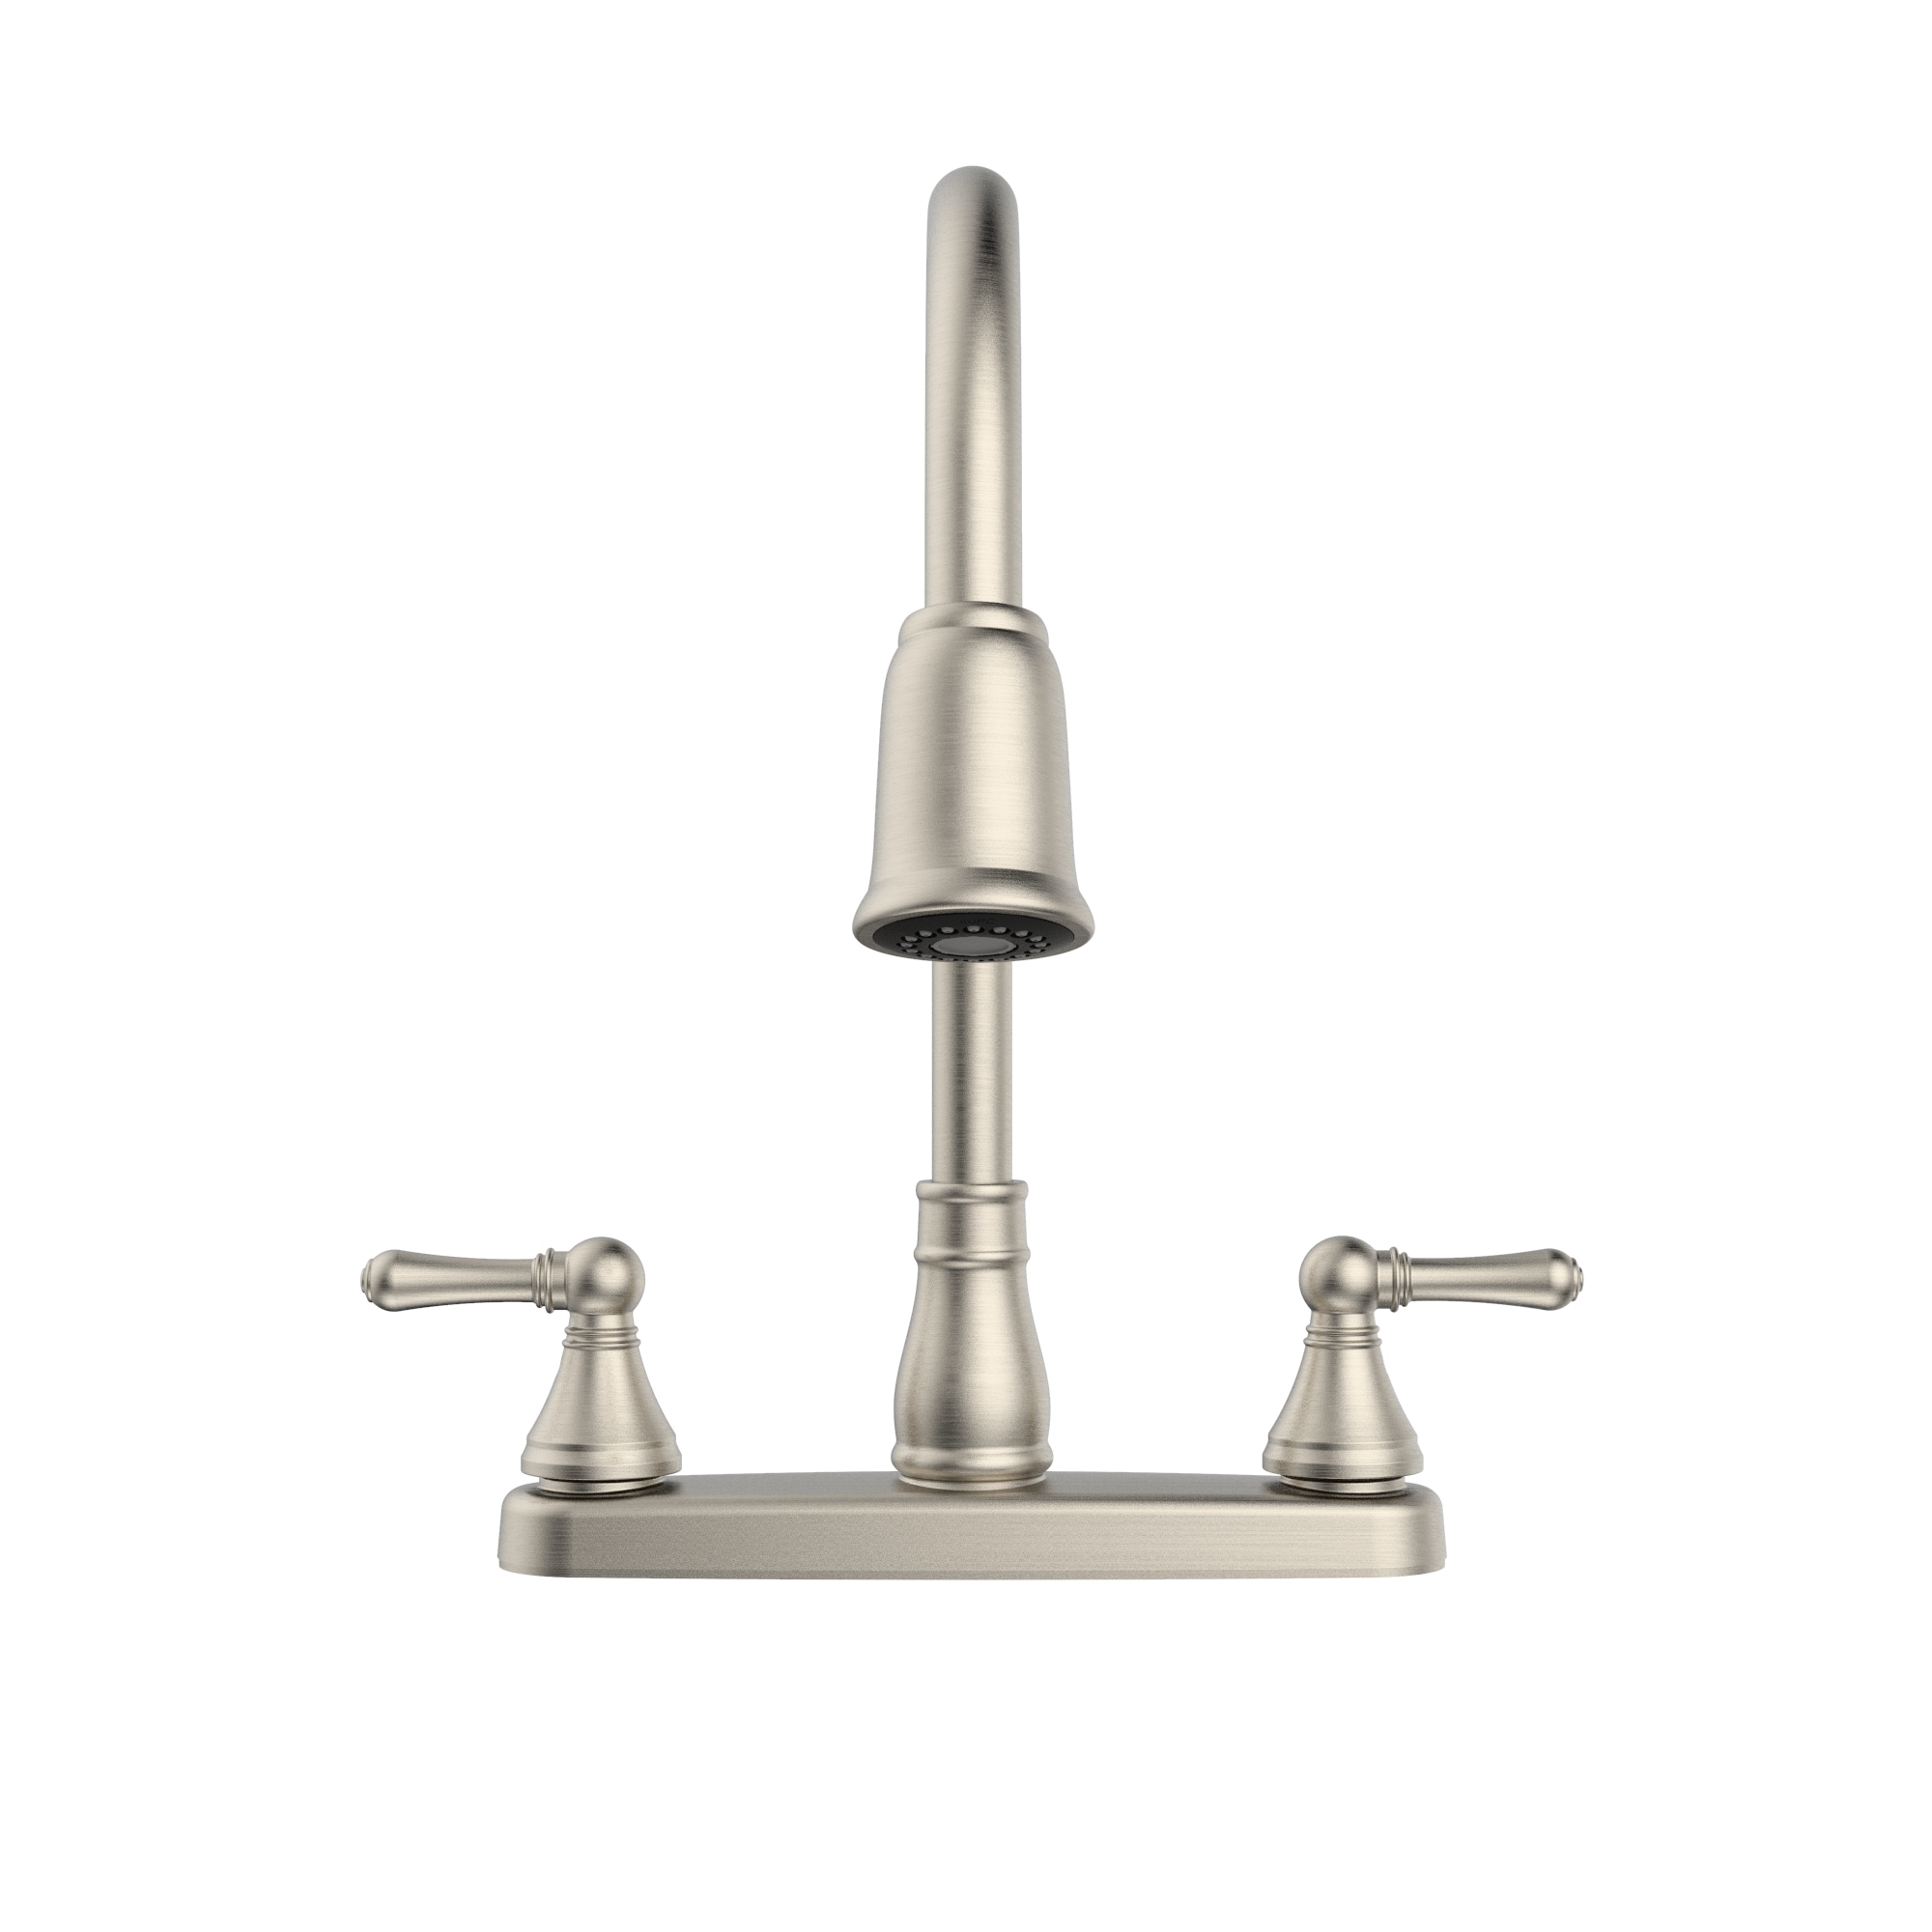 Belanger Essential Brushed Nickel Double Handle Pull-down Kitchen